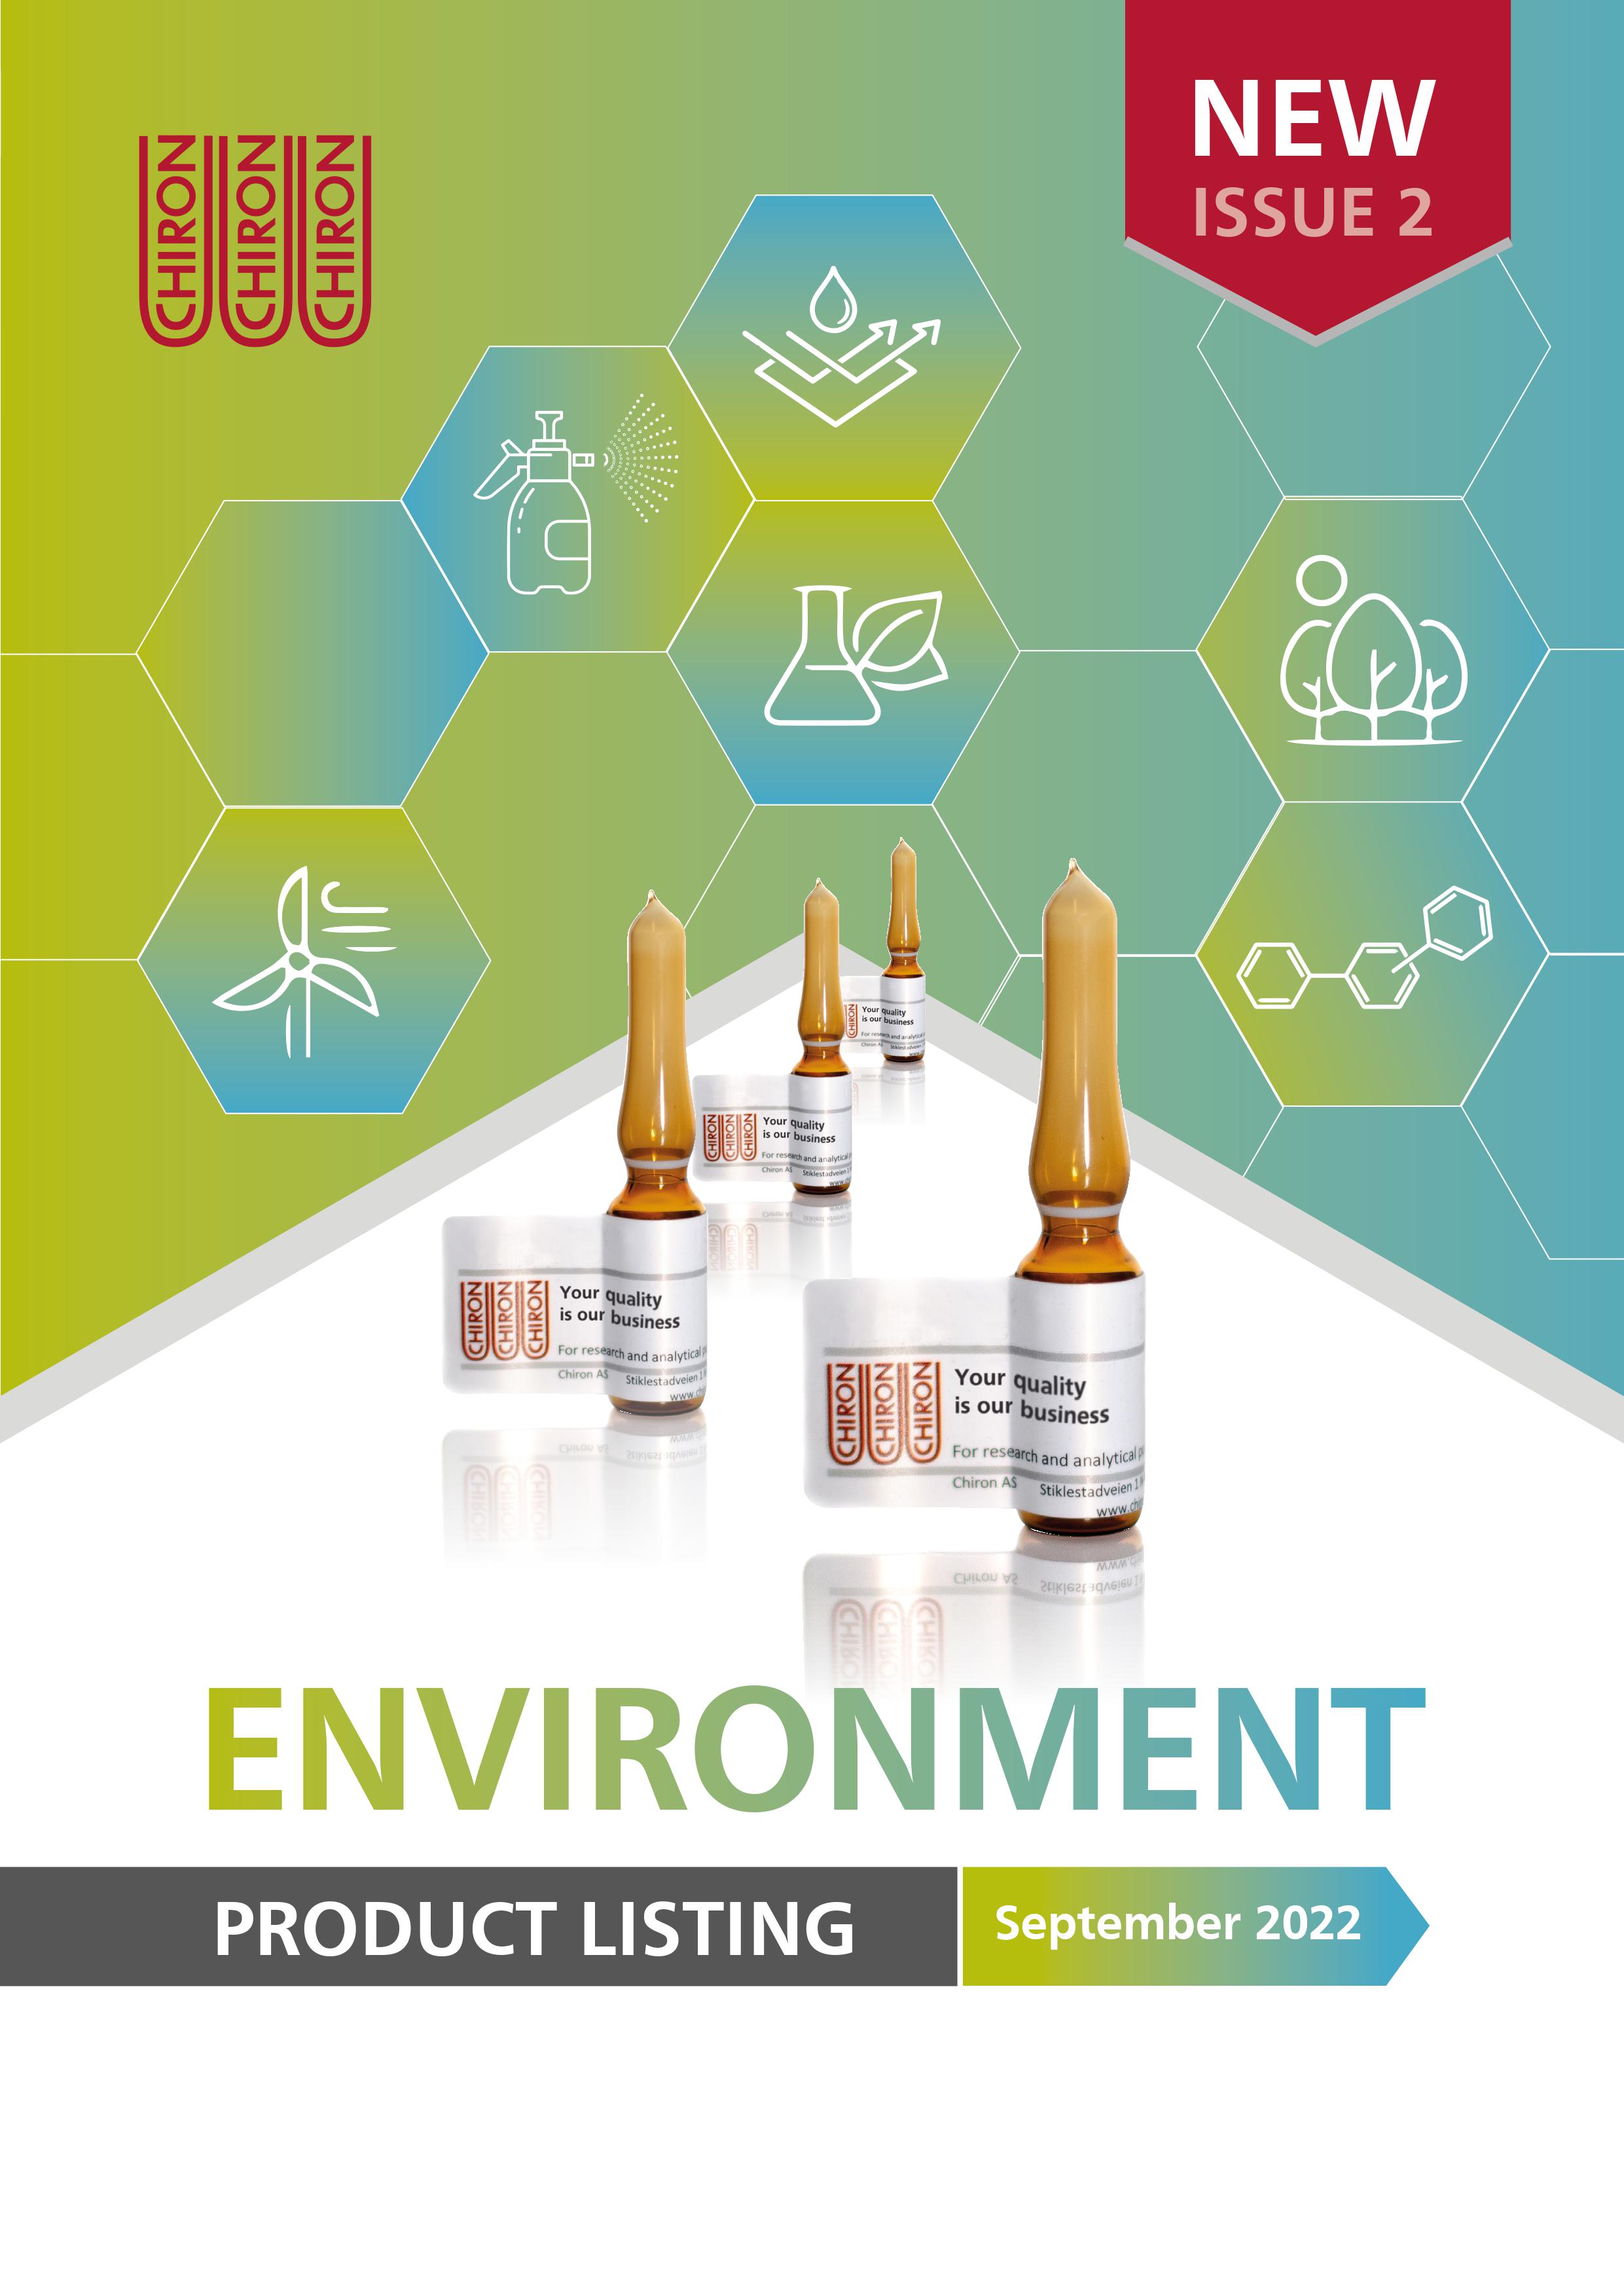 New Environmental Product Issue 2 | September 2022